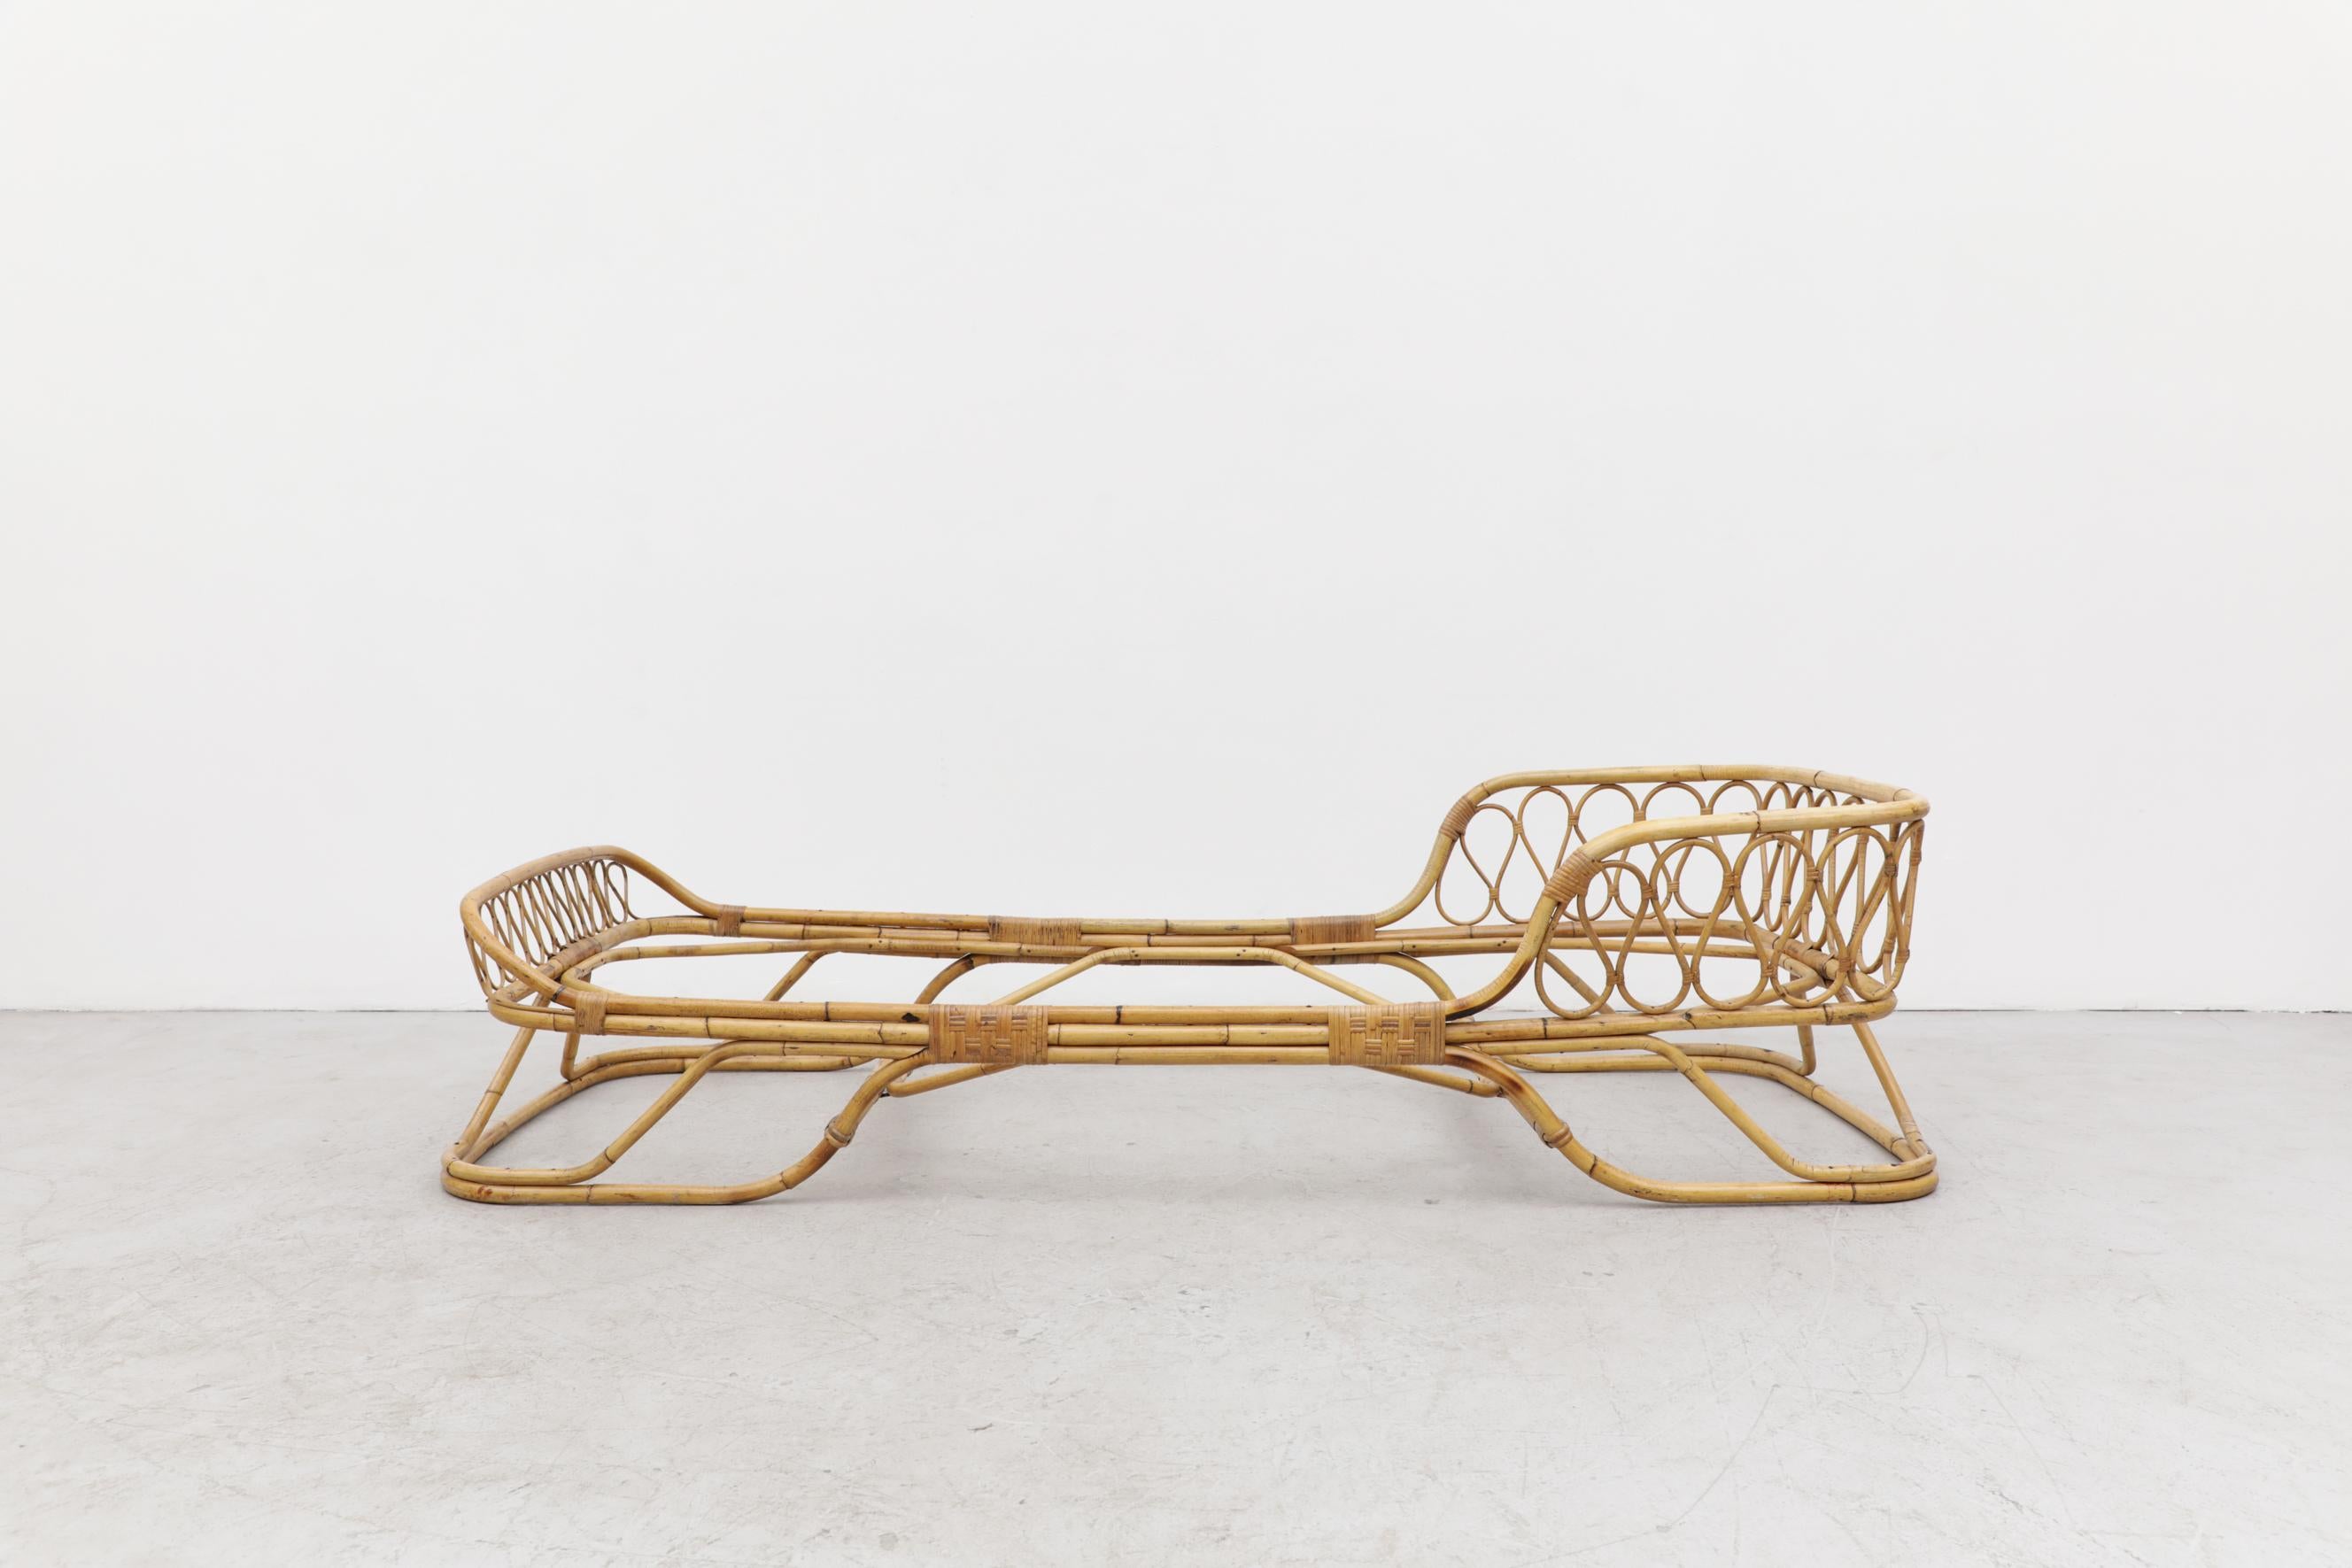 This stunning Mid-Century bent bamboo daybed frame has a sturdy but lightweight sleigh shaped frame and features a decorative crown-like headboard. There is minimal rattan loss and no structural damage. It is in original condition with wear that's